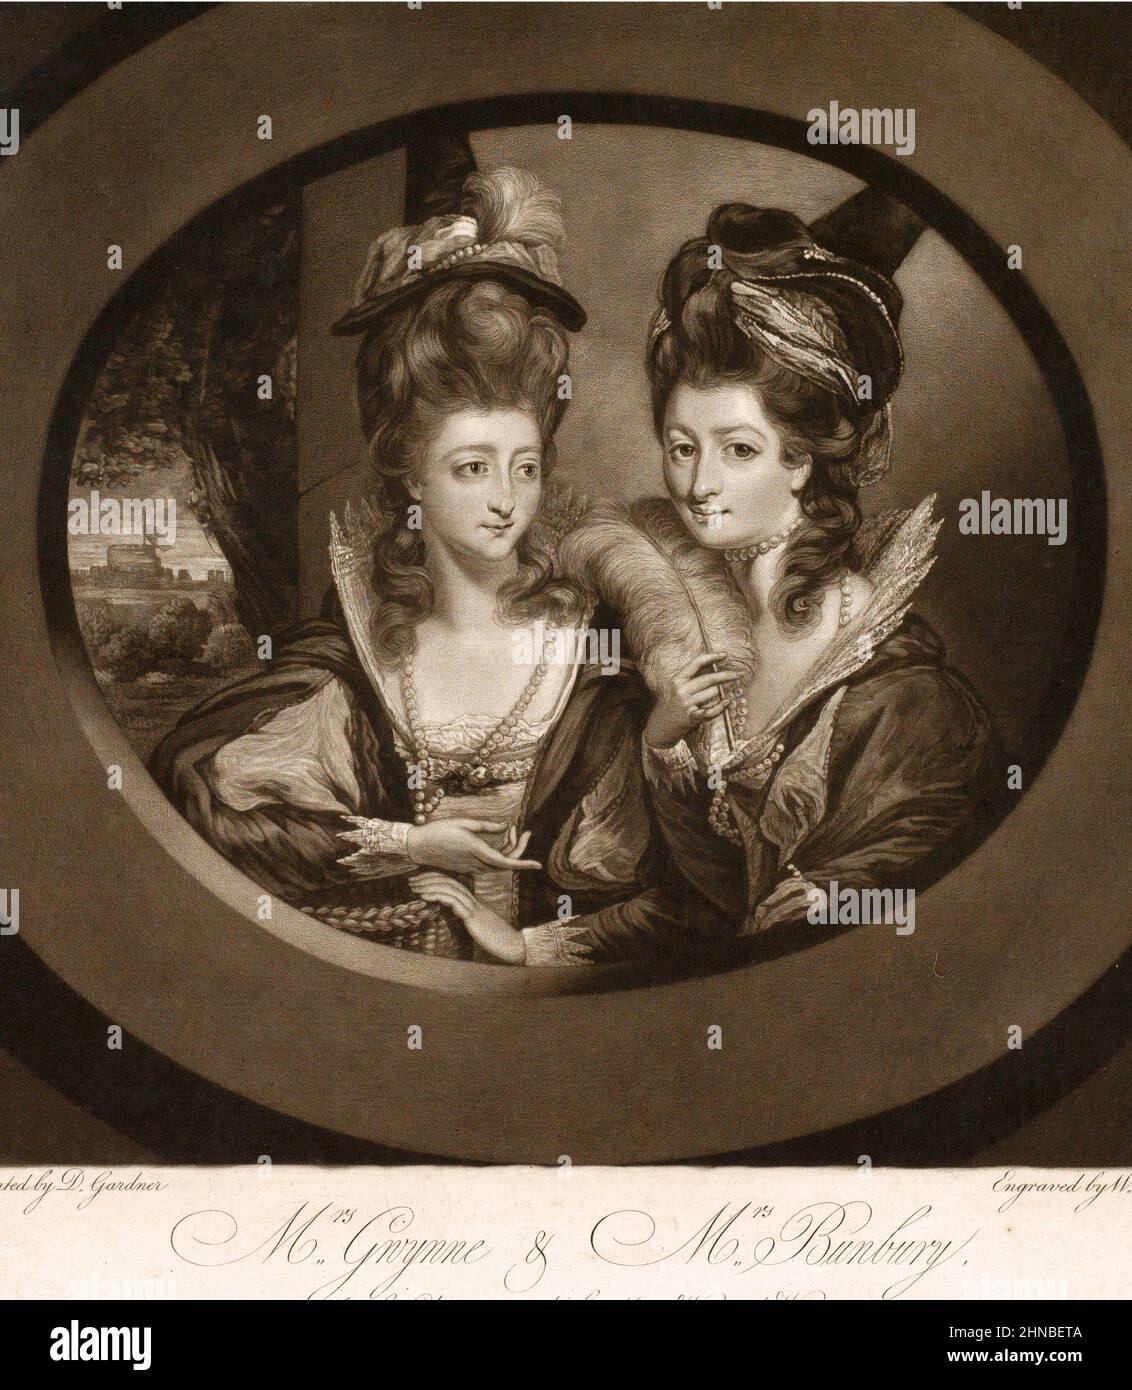 Mrs. Gwyn & Mrs. Bunbury in the Characters of Shakespeare's The Merry Wives of Windsor Stock Photo